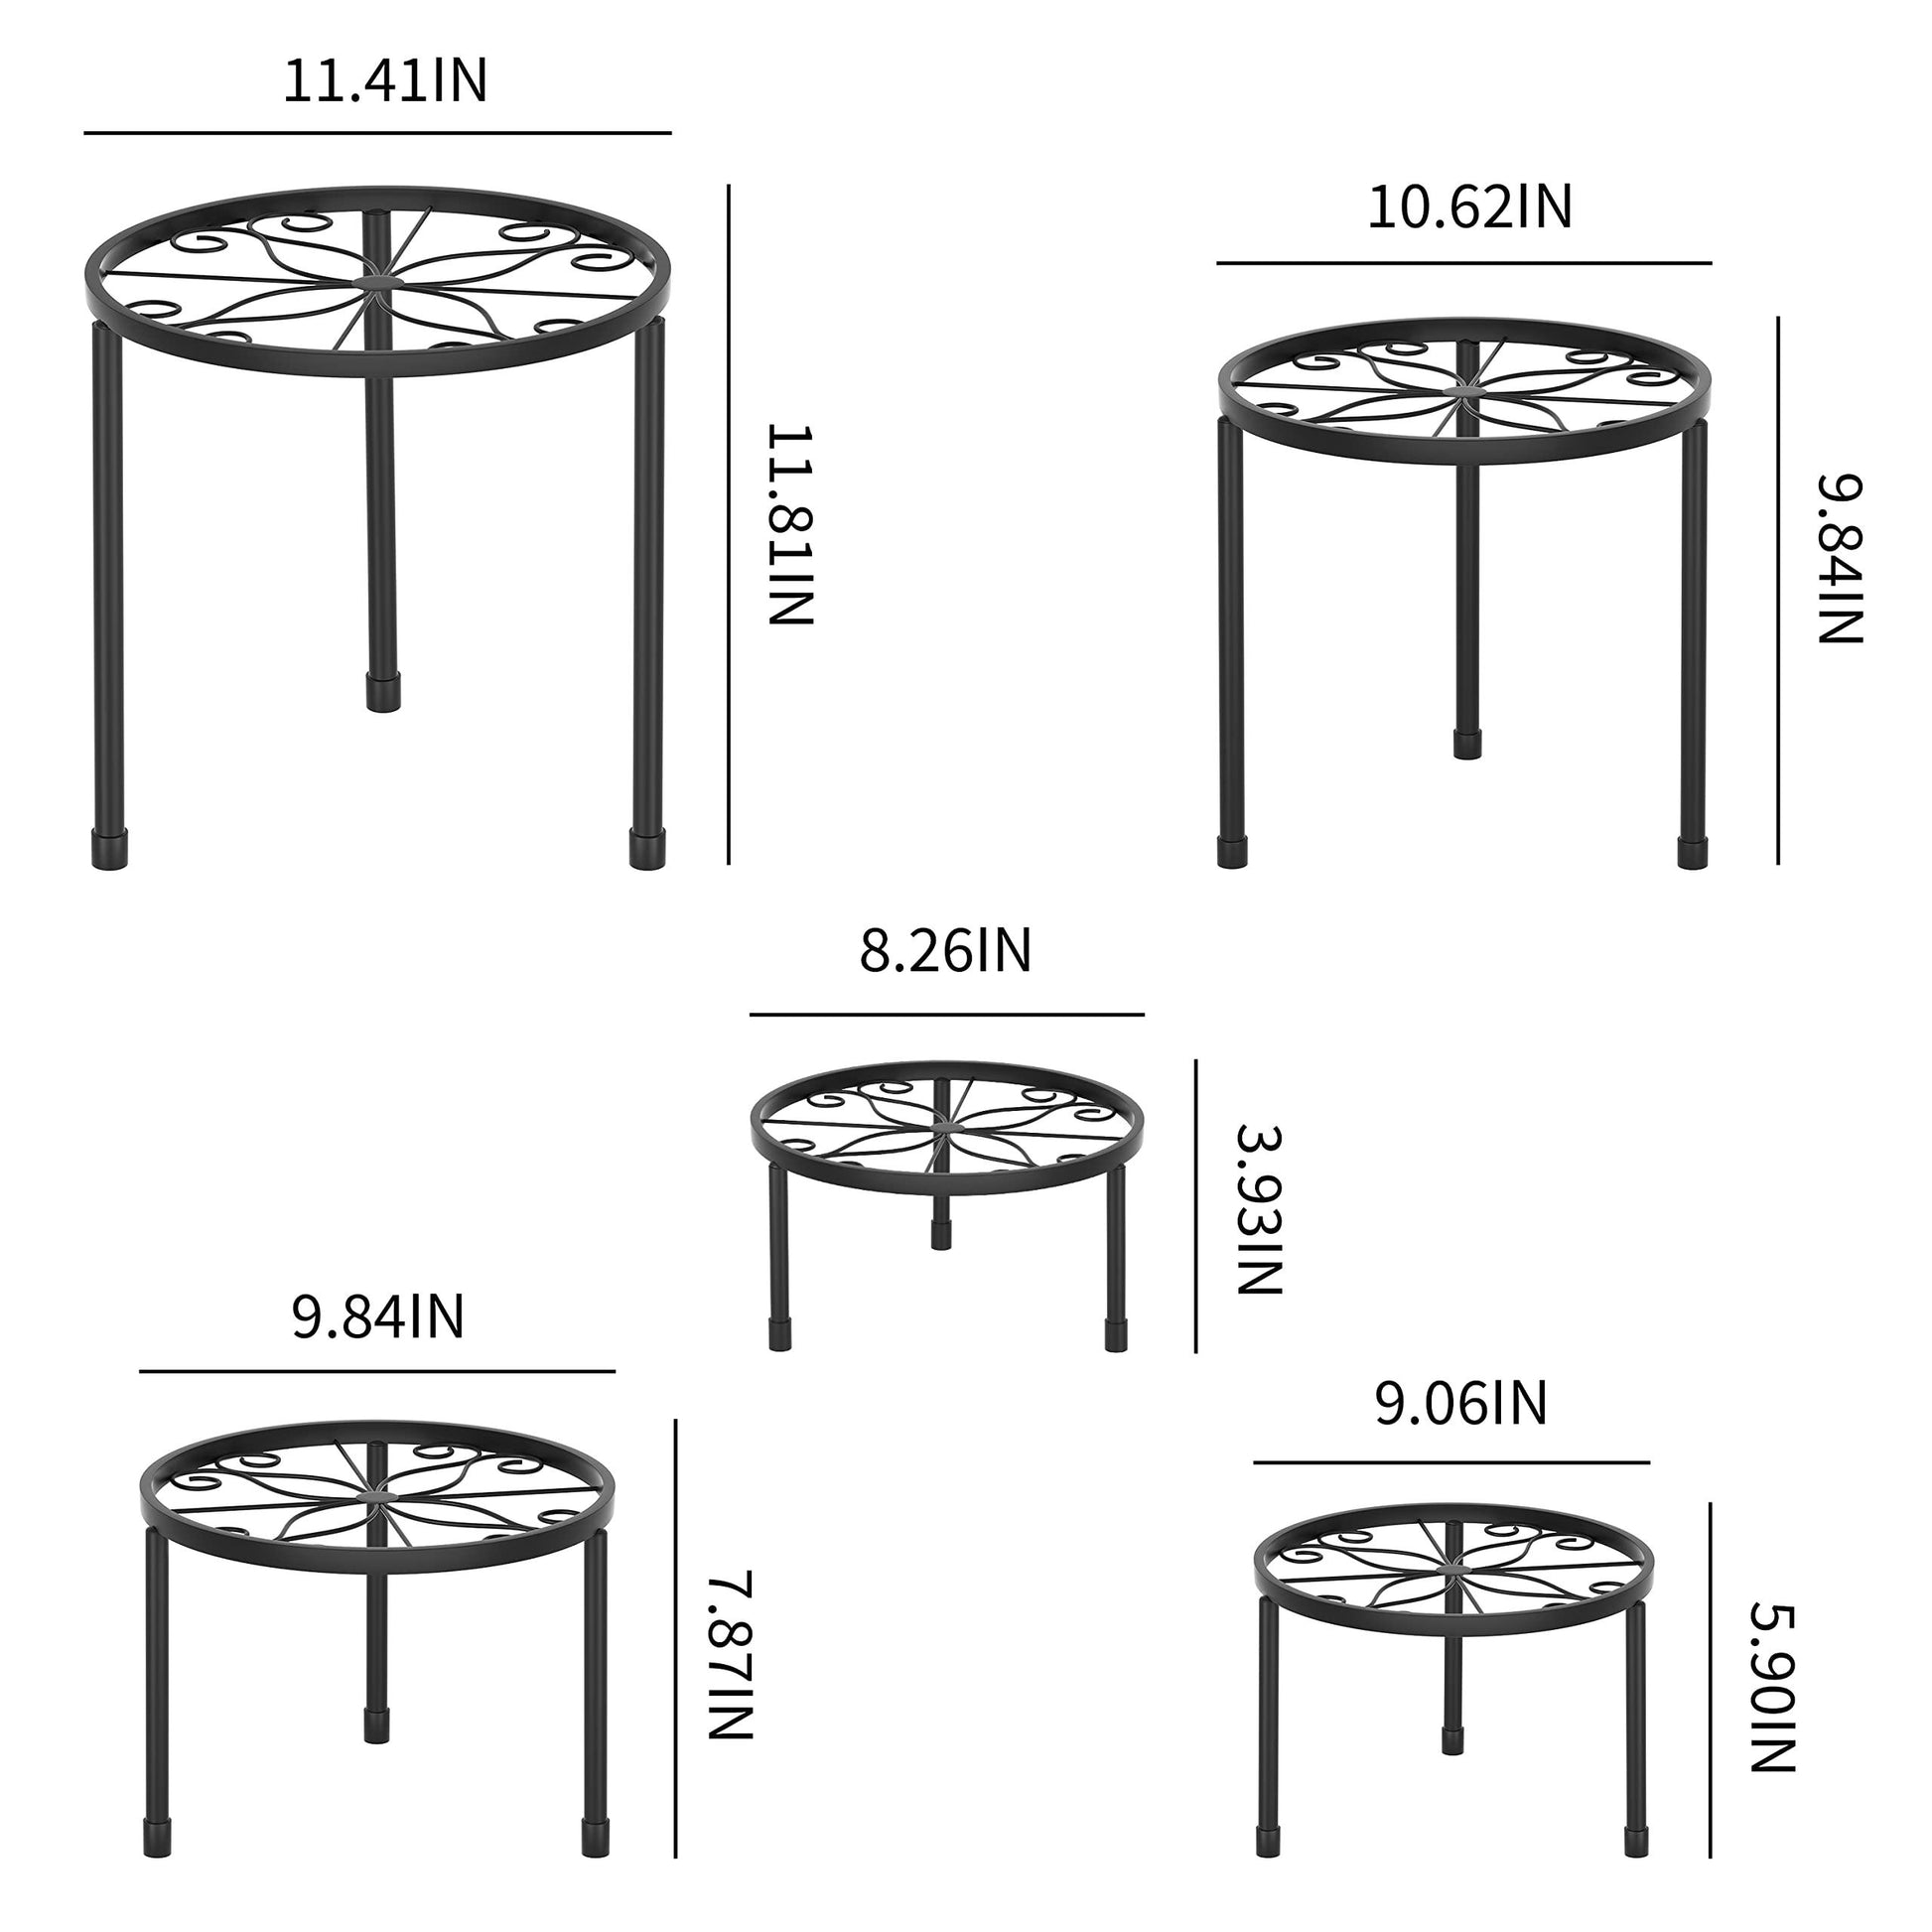 Linpla 5-Pack Decent Metal Plant Stands, Heavy Duty Flower Pot Stands for Multiple Plant, Anti-Rust Iron Plant Pot Shelf, Decoration Racks for Home Indoor and Outdoor (5 Pack Black) - CookCave